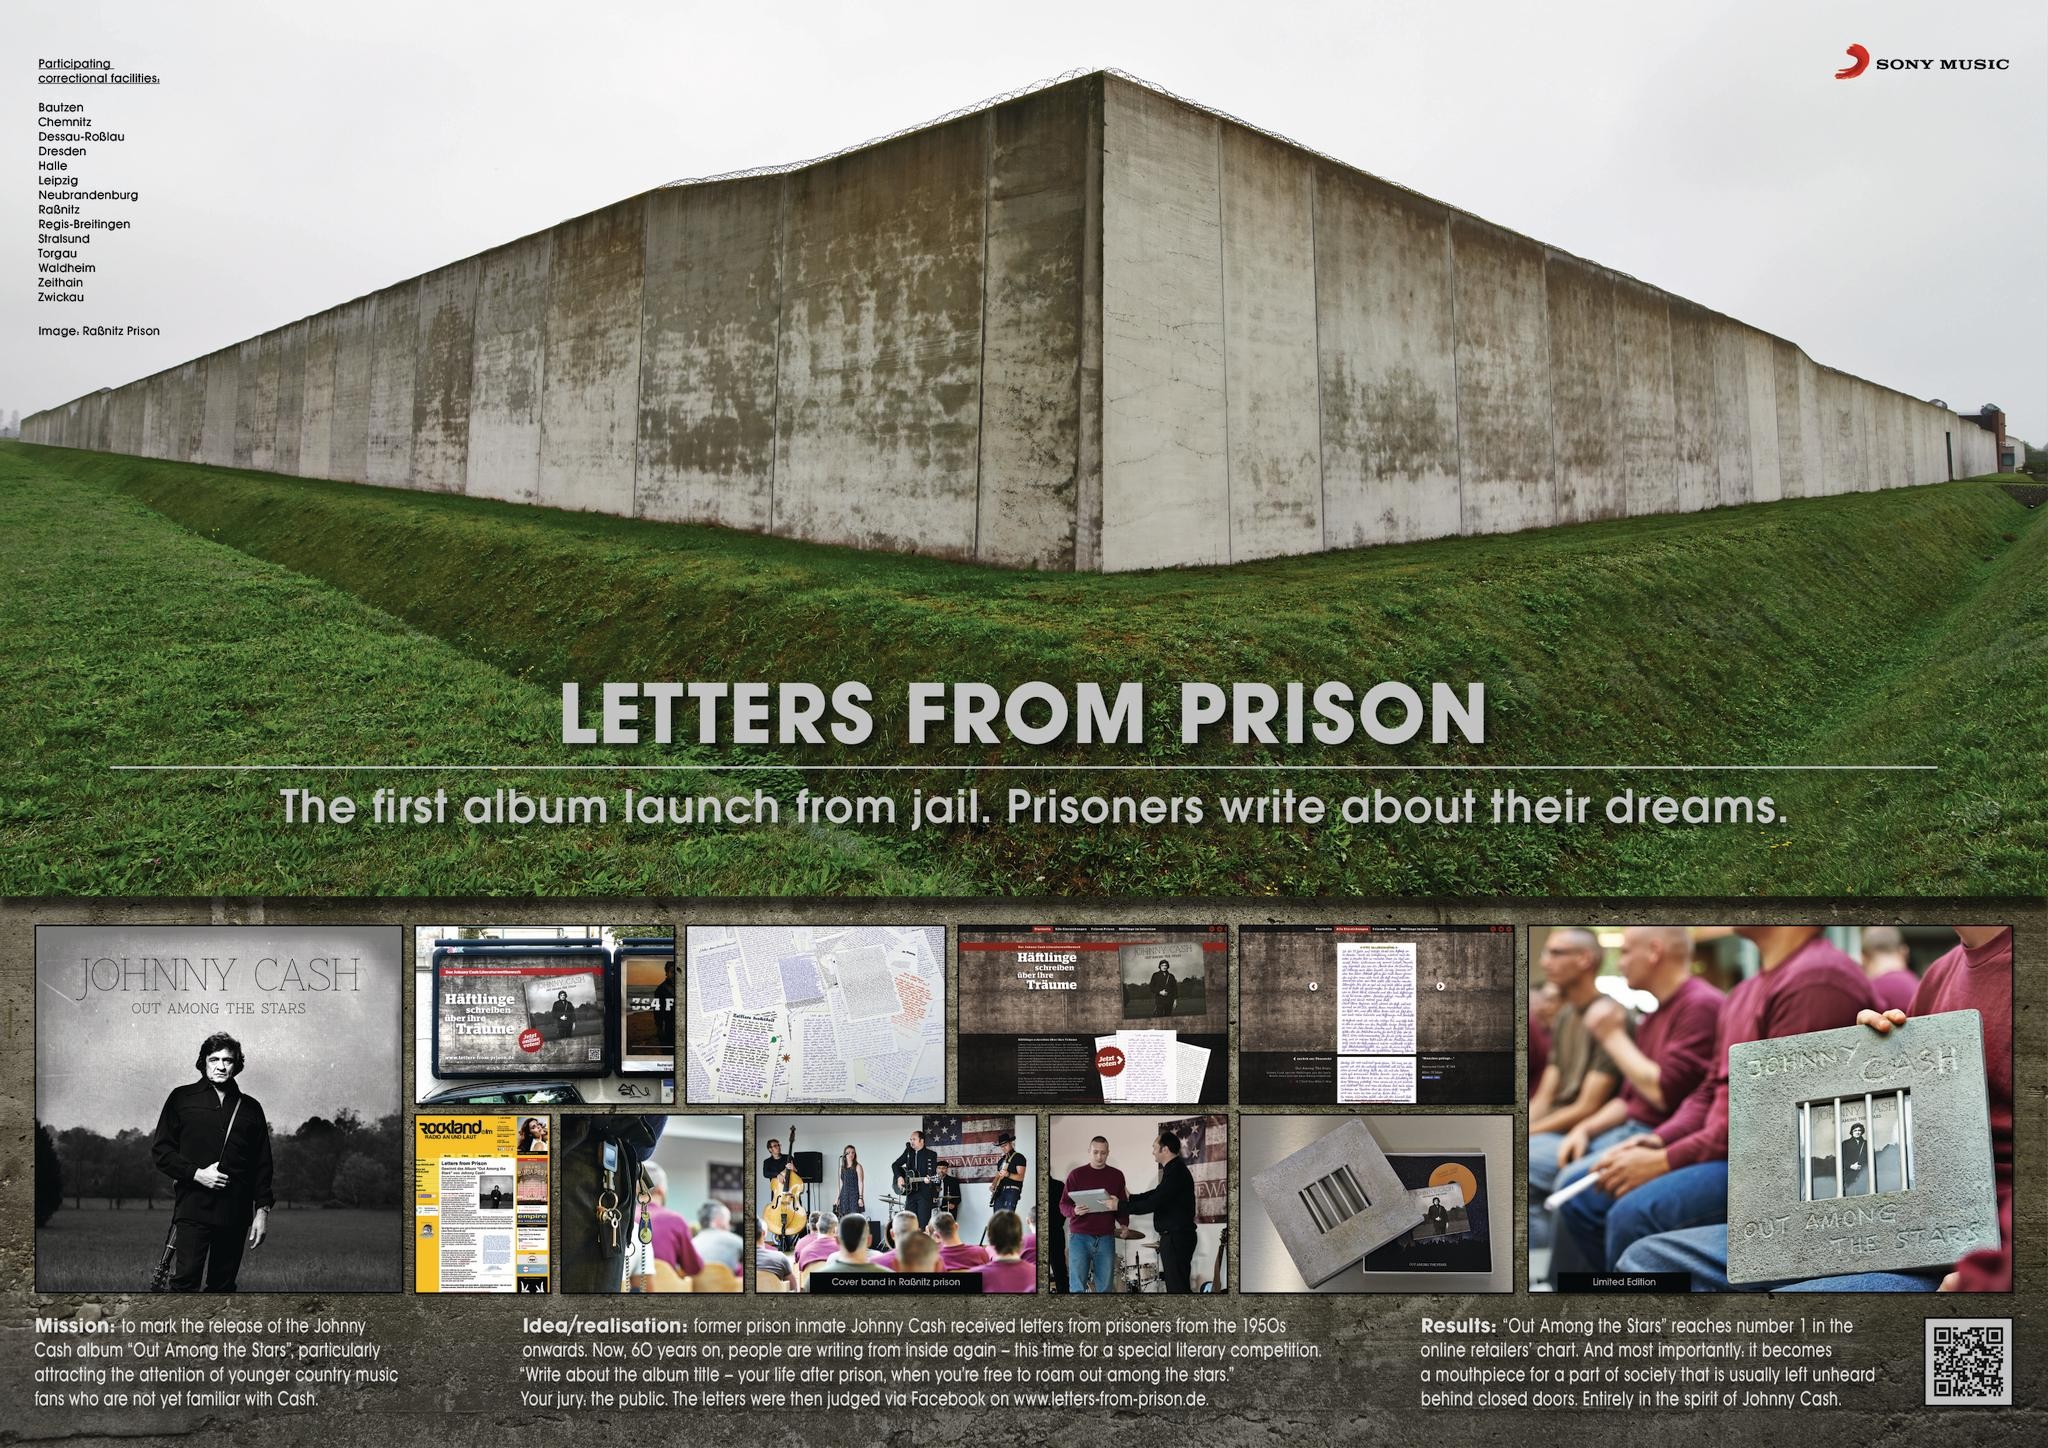 LETTERS FROM PRISON